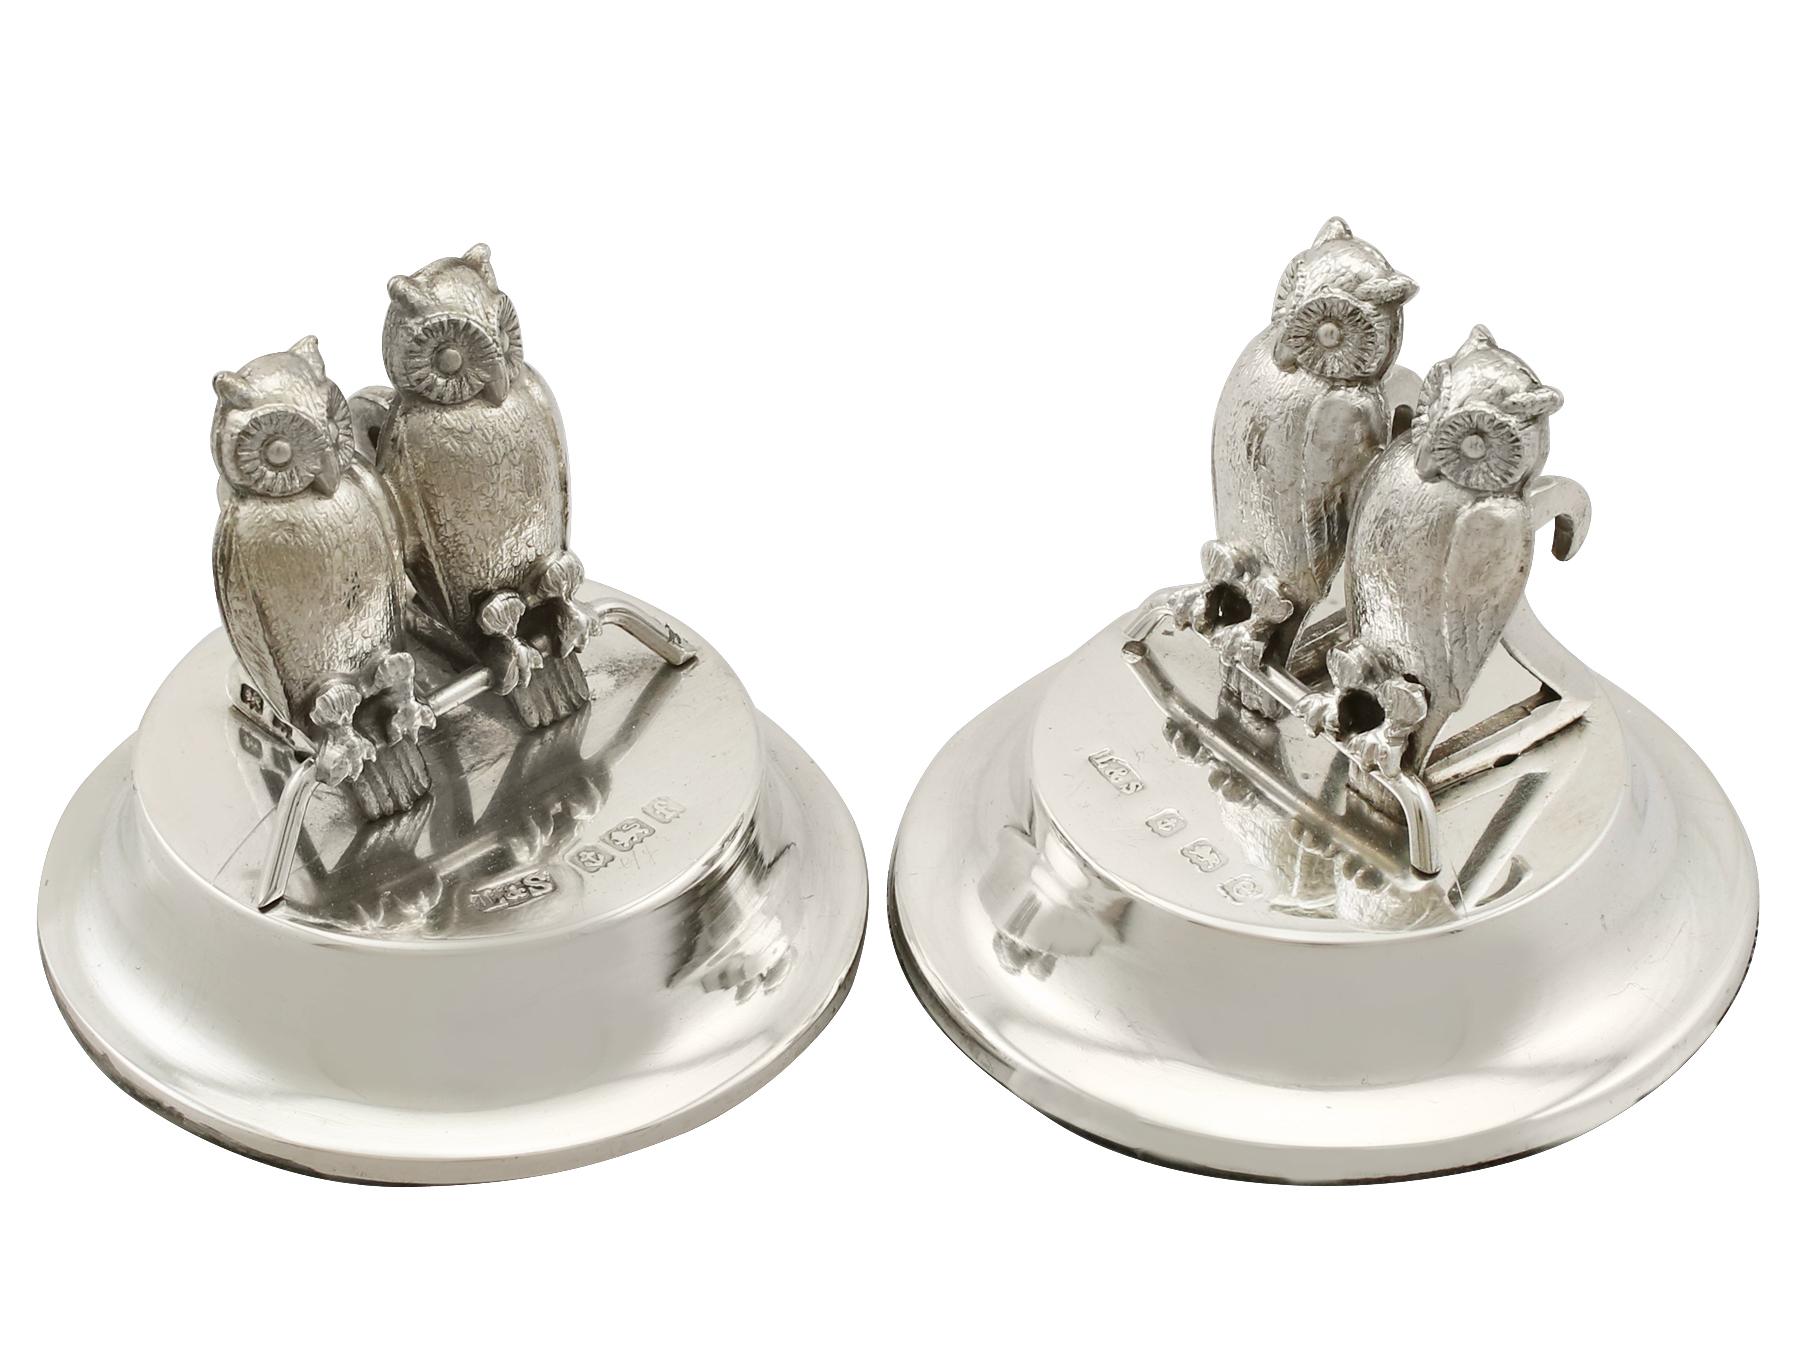 An exceptional, fine and impressive pair of antique Edwardian English cast sterling silver card/menu holders; an addition to our animal related silverware collection.

These exceptional Edwardian cast sterling silver menu holders have been